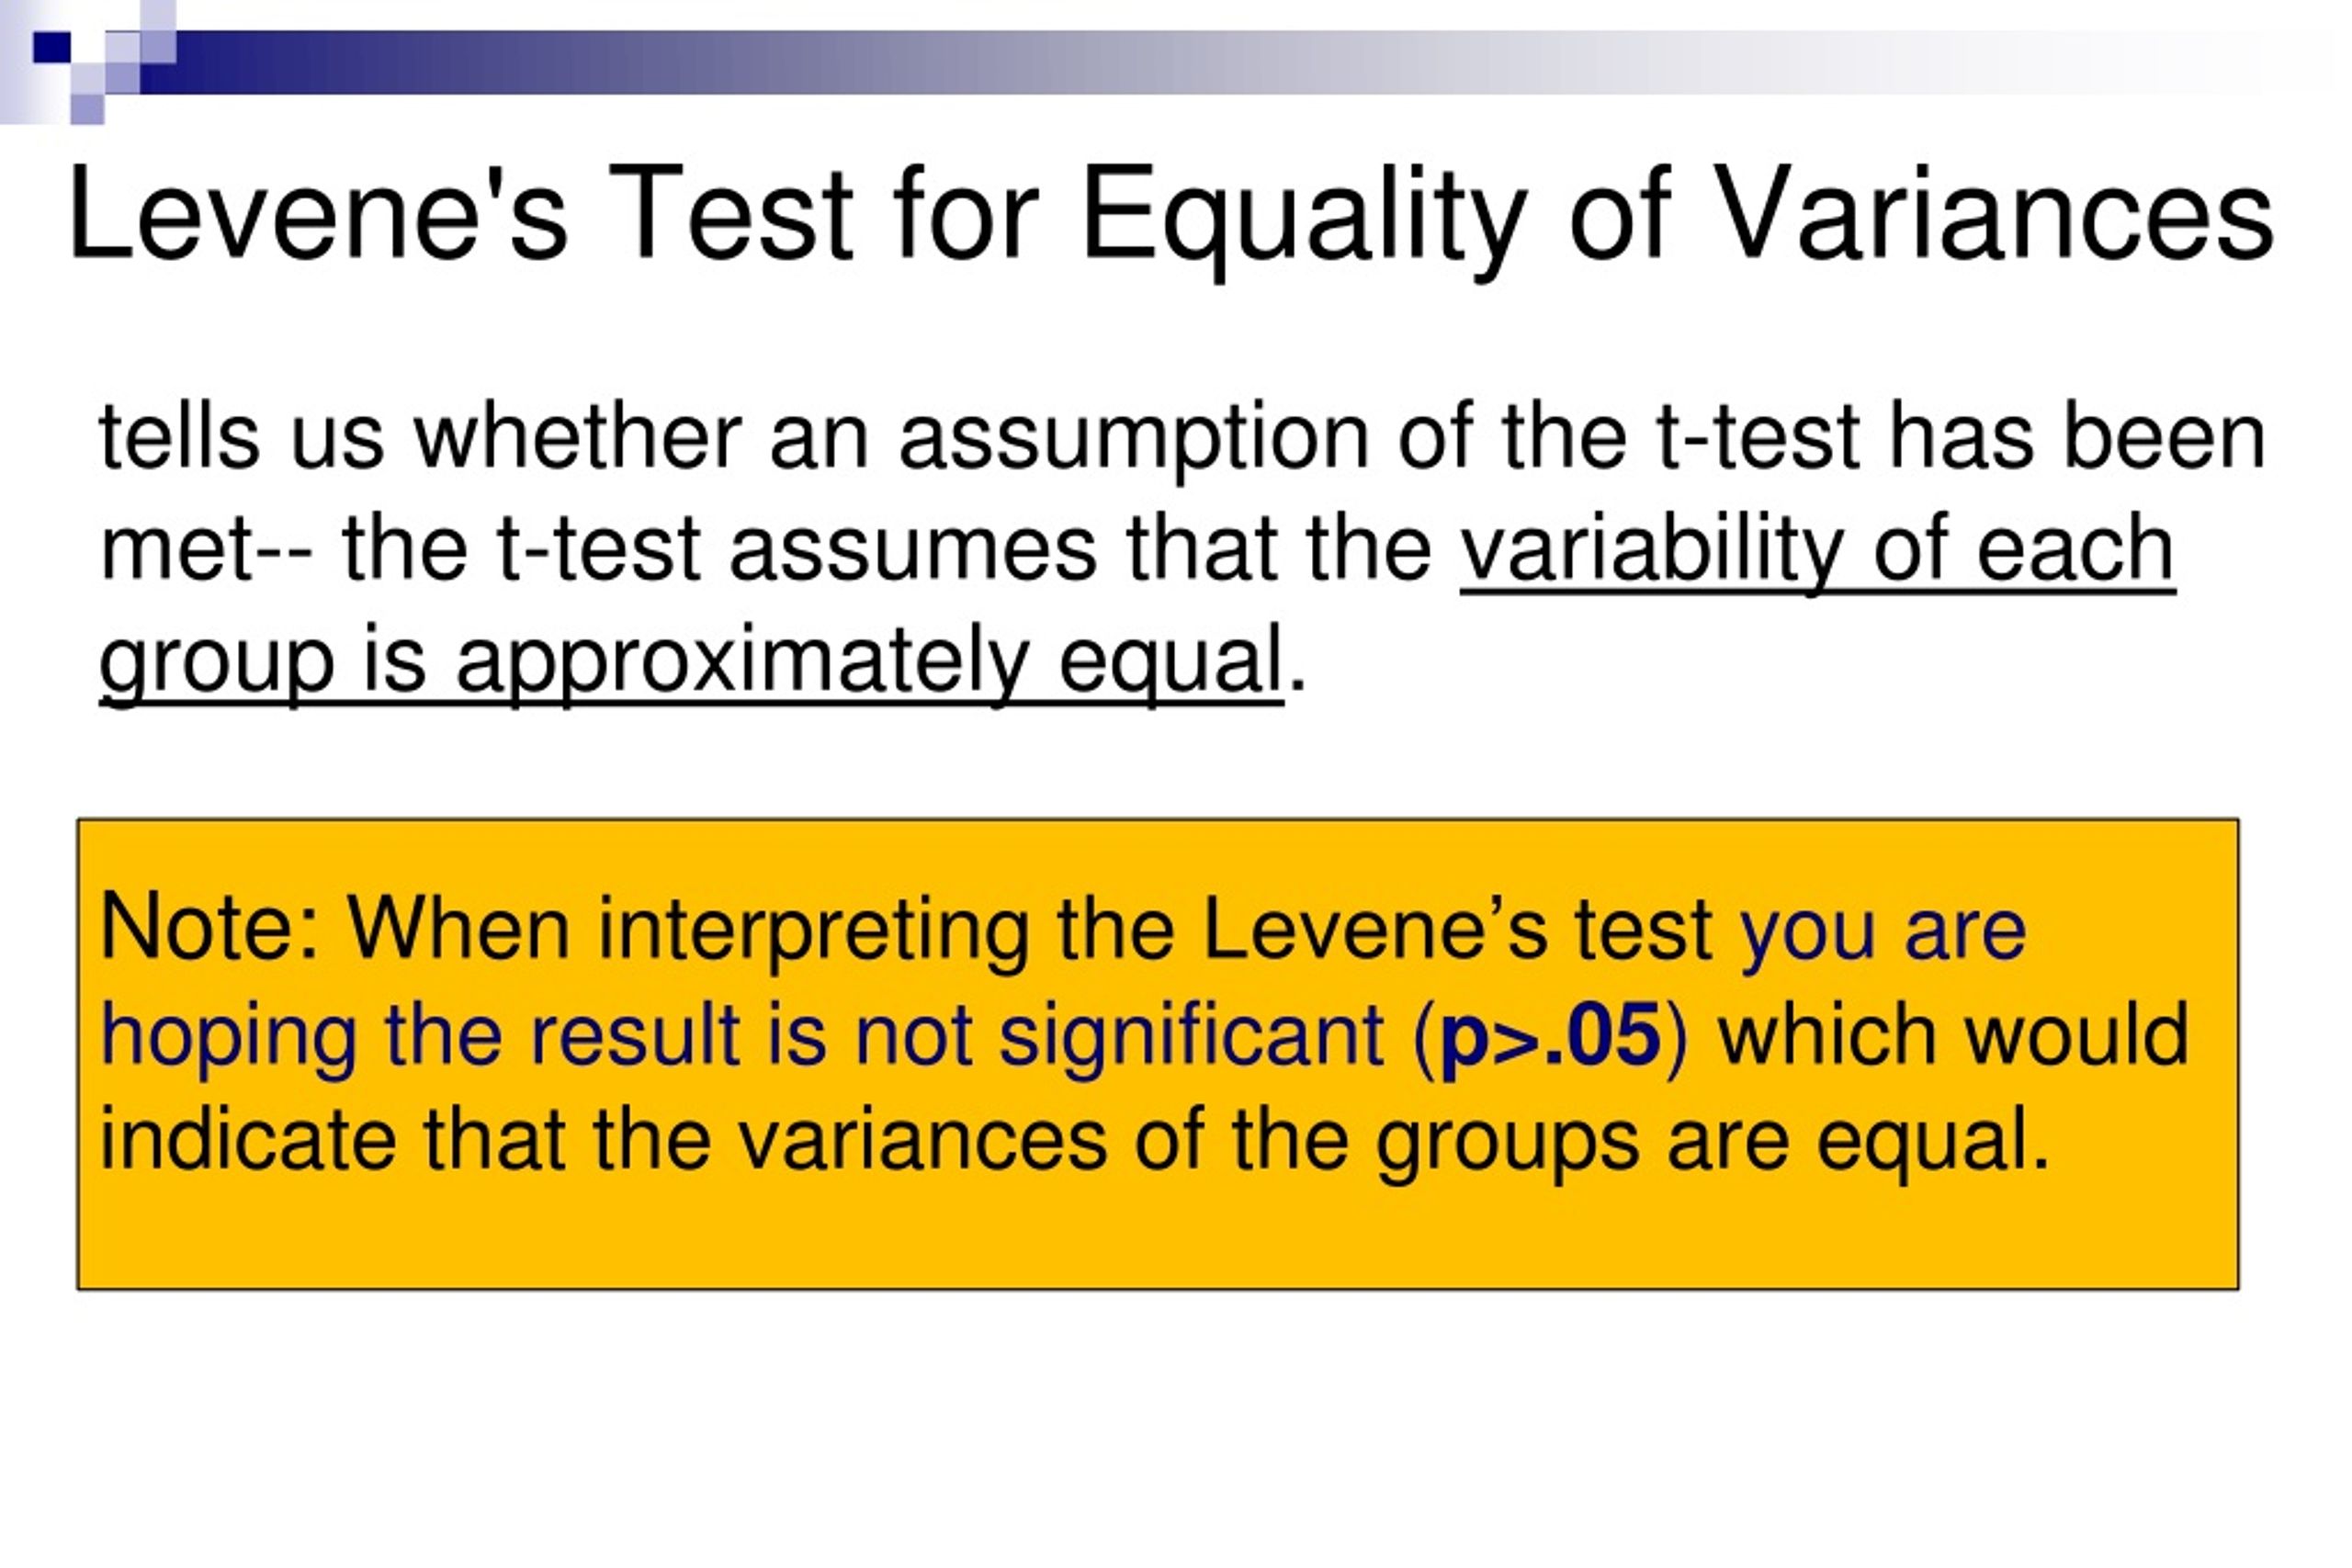 null hypothesis test for equality